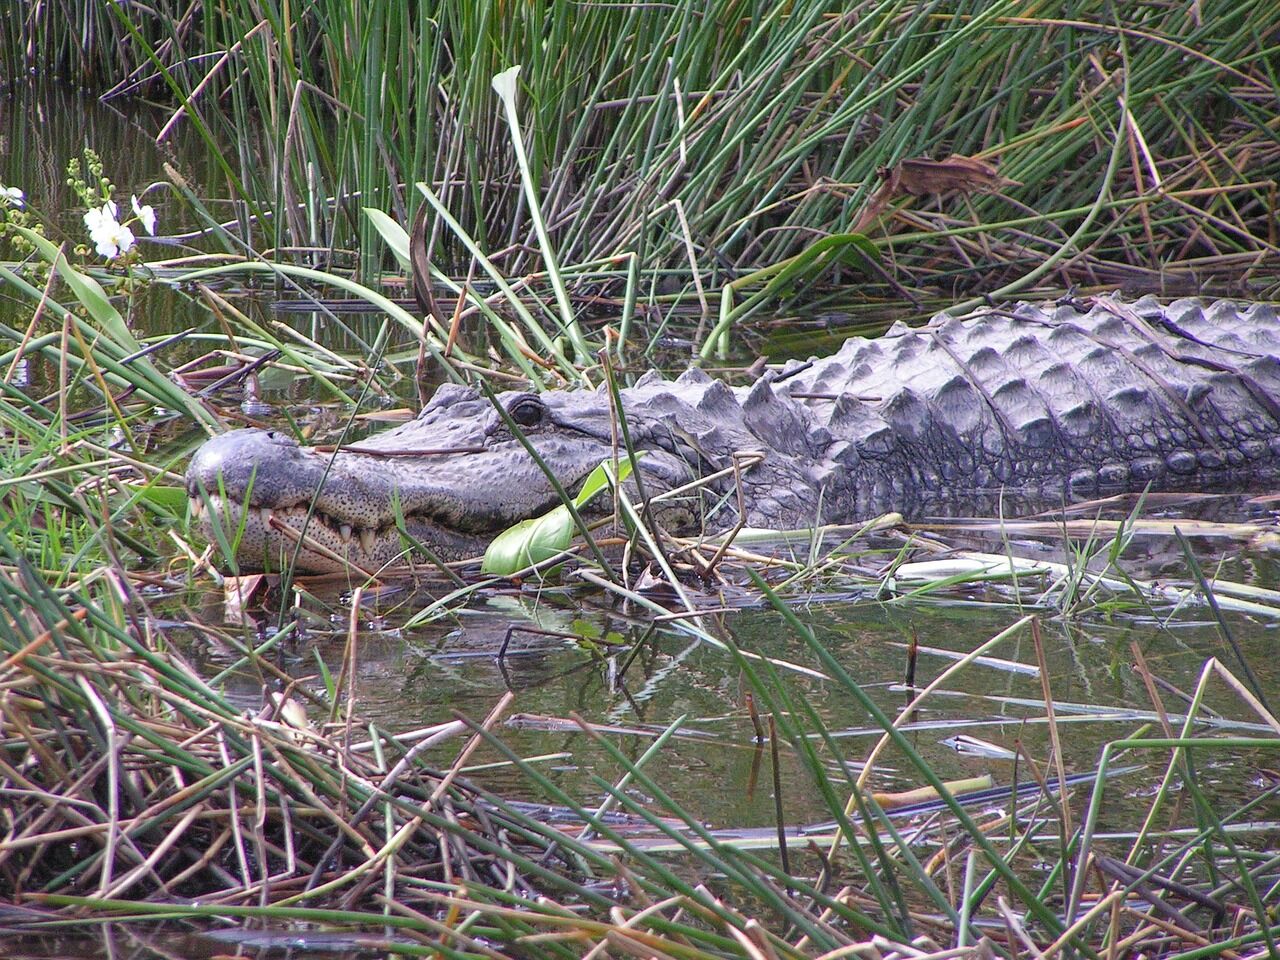 A crocodile in a Panama City conservation